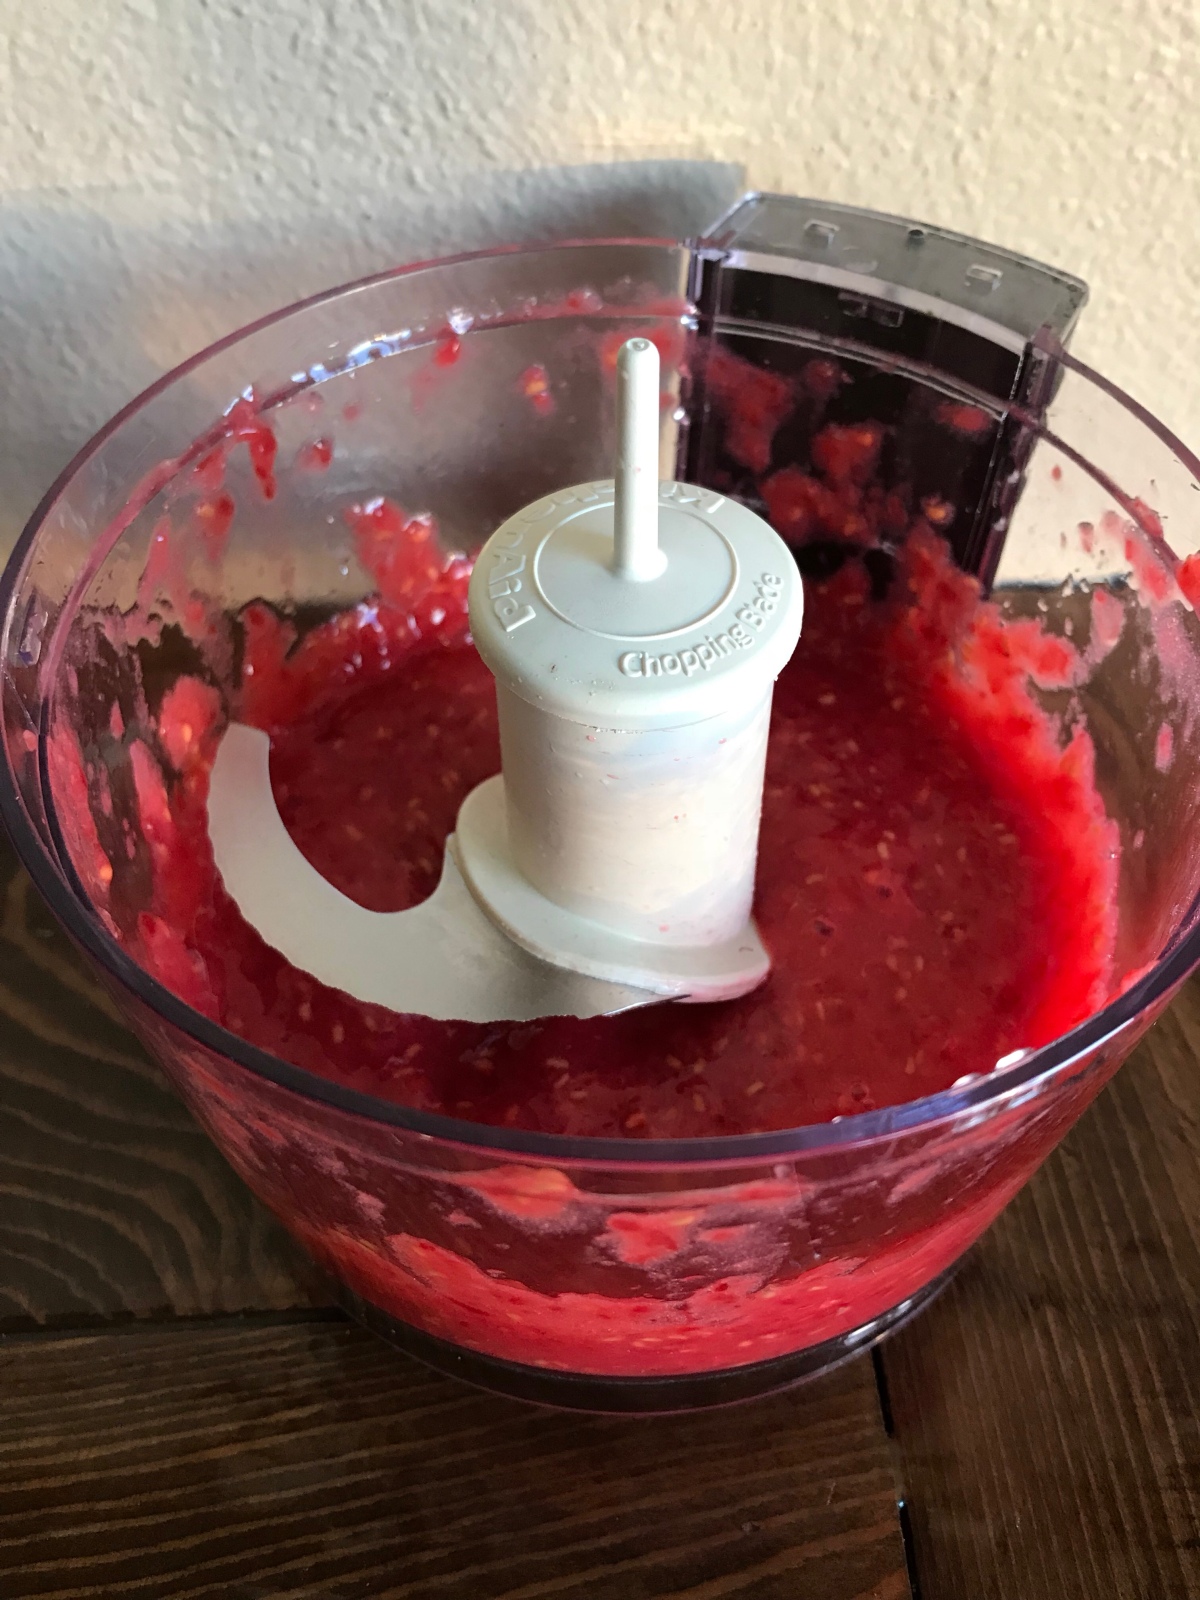 Third Trimester Mocktail: Next, purée the raspberries to bring a fruity kick to your drink.